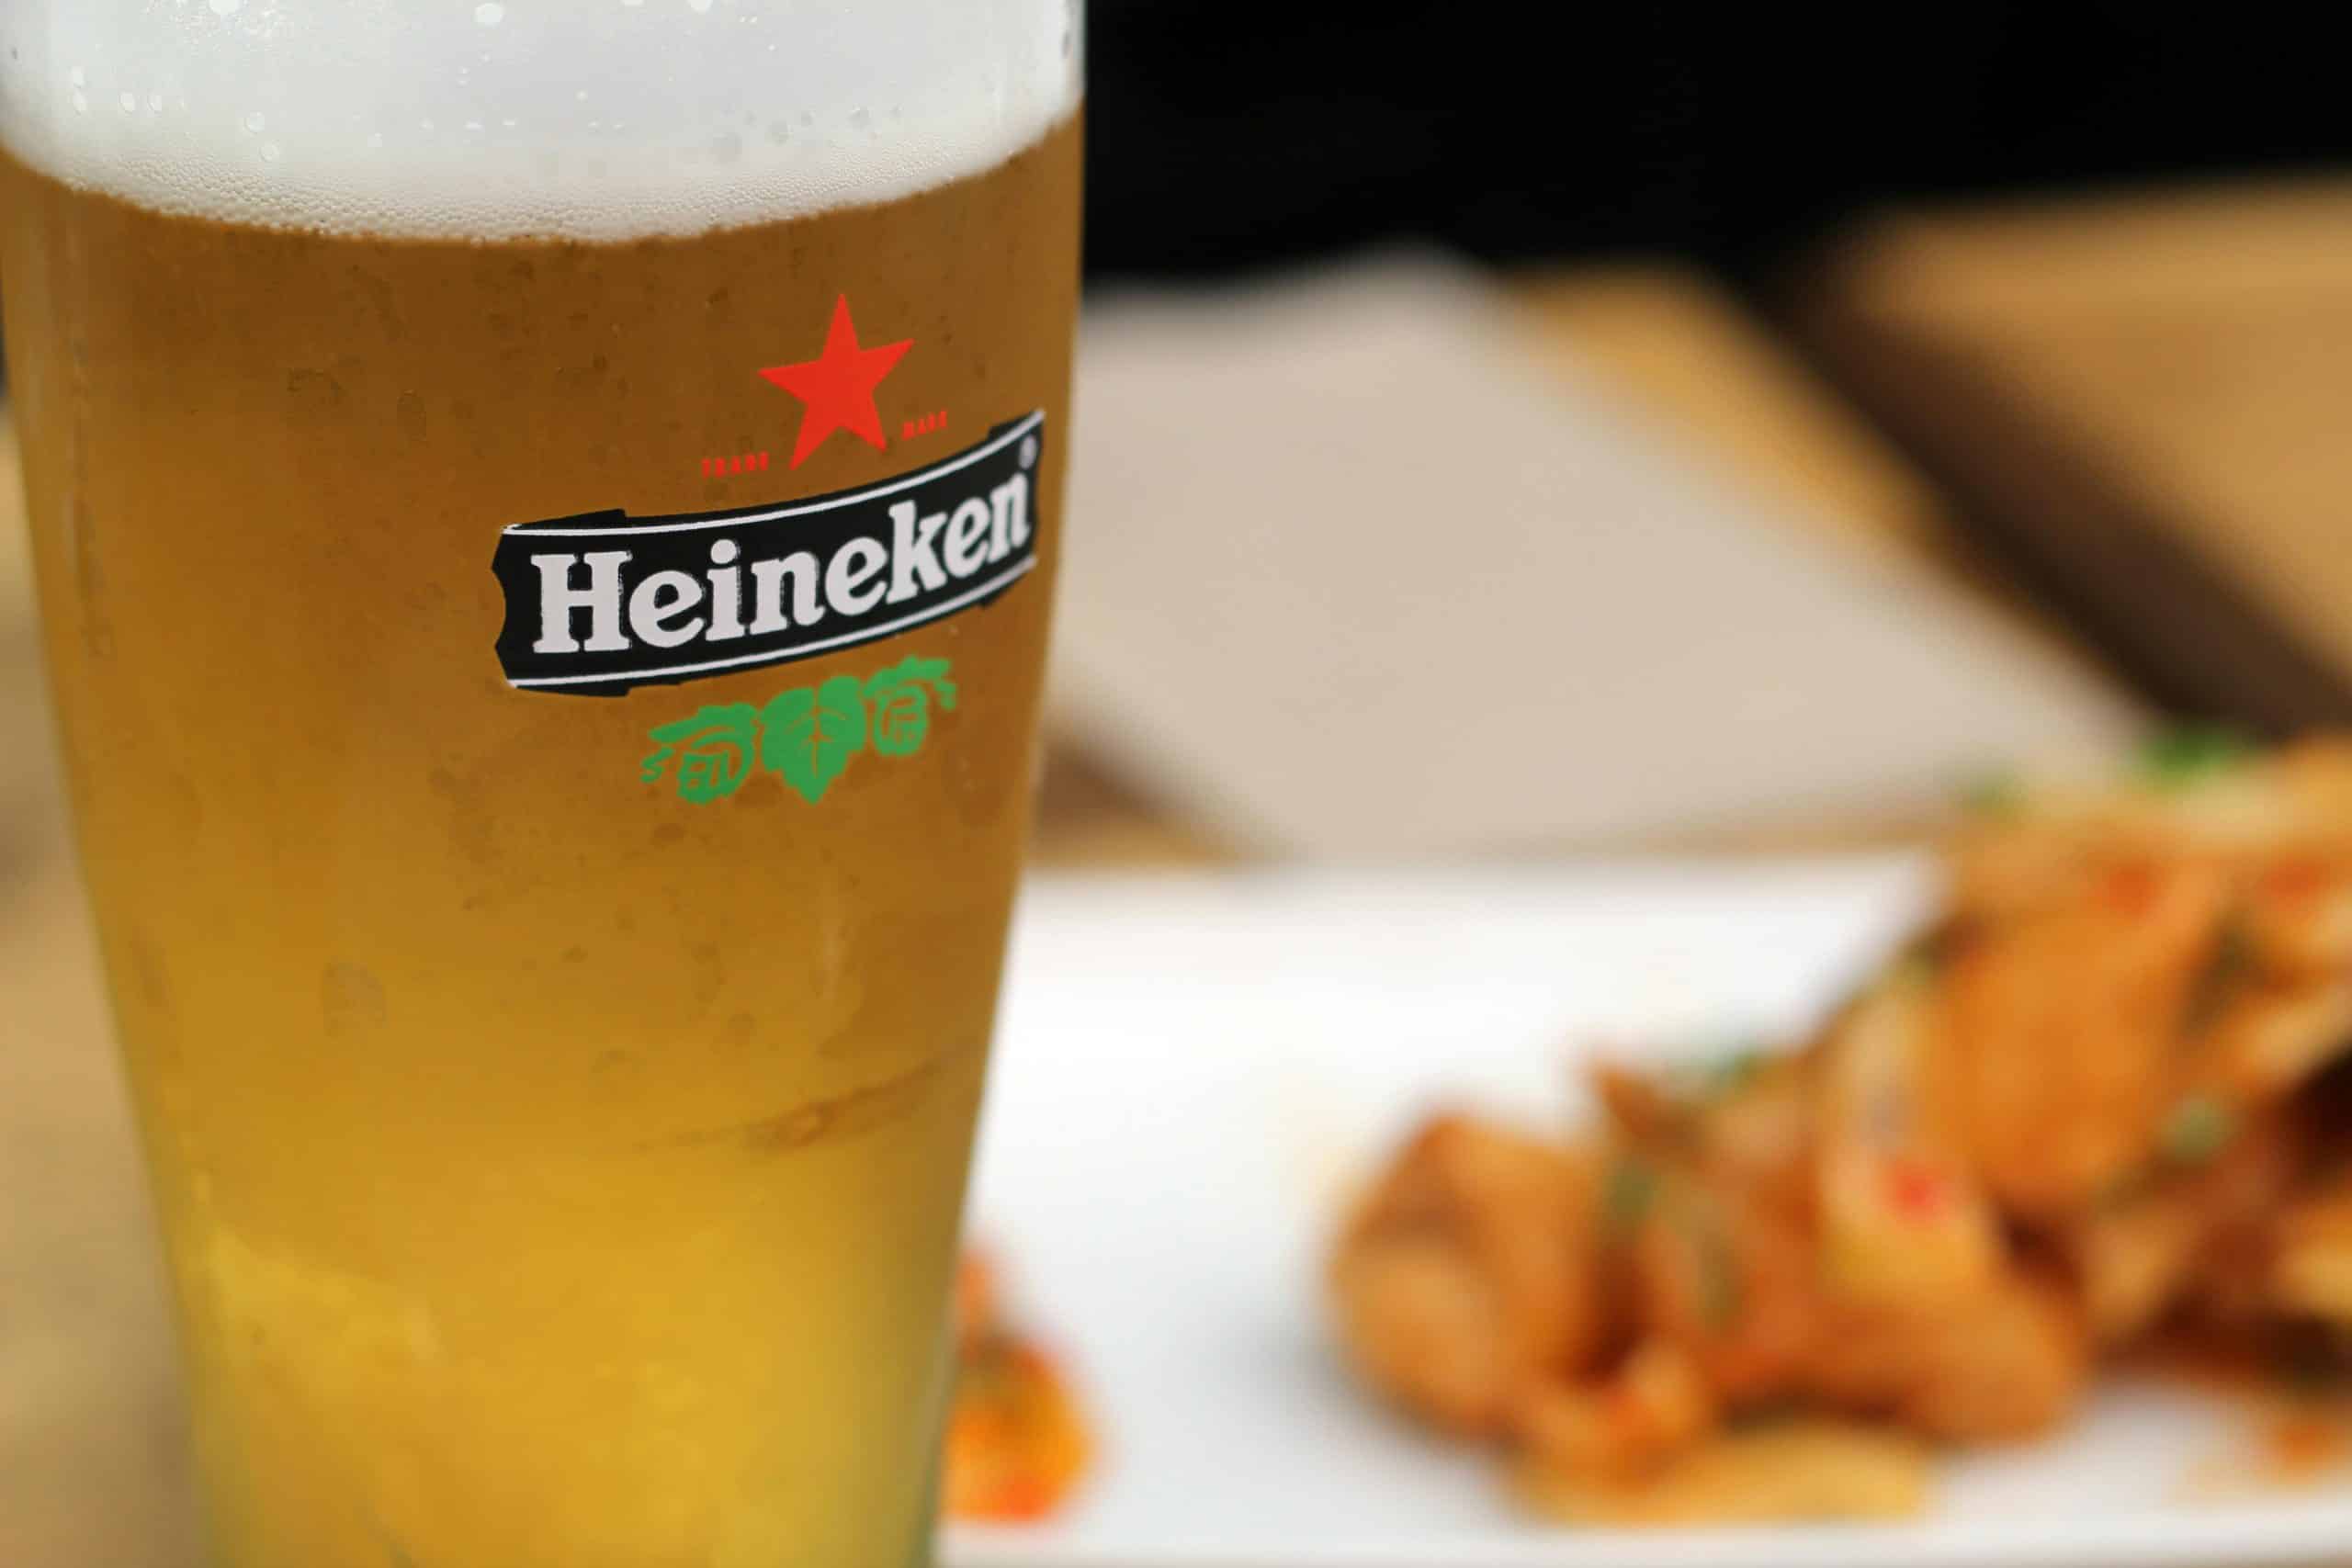 Corporate Videography Services for Heineken in Amsterdam, Netherlands